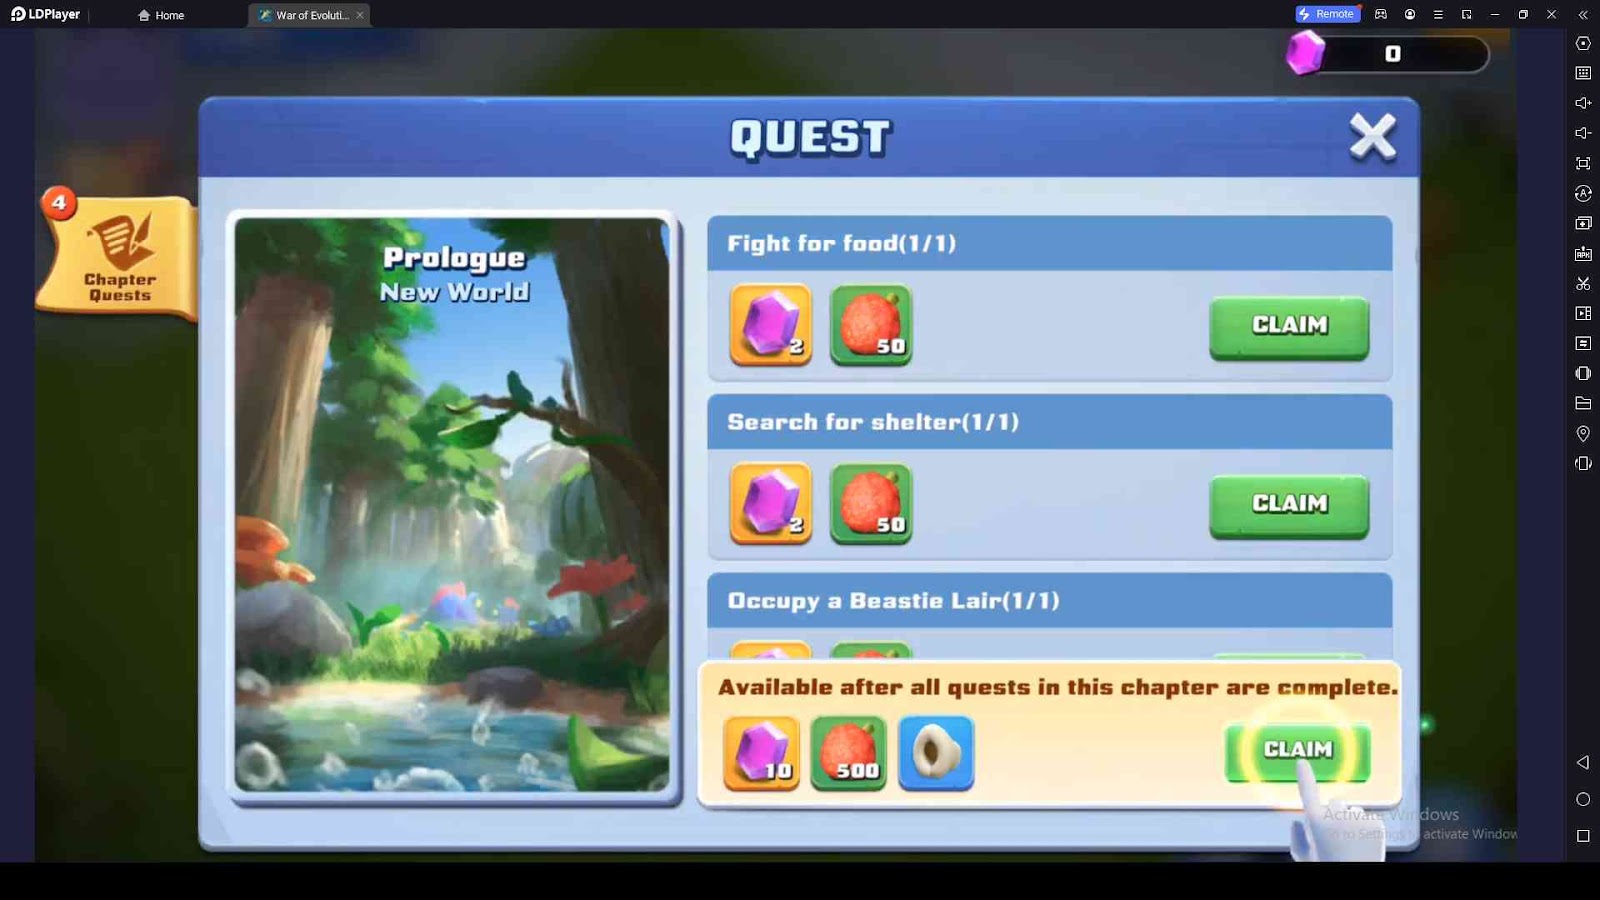 Complete the Chapter Quests